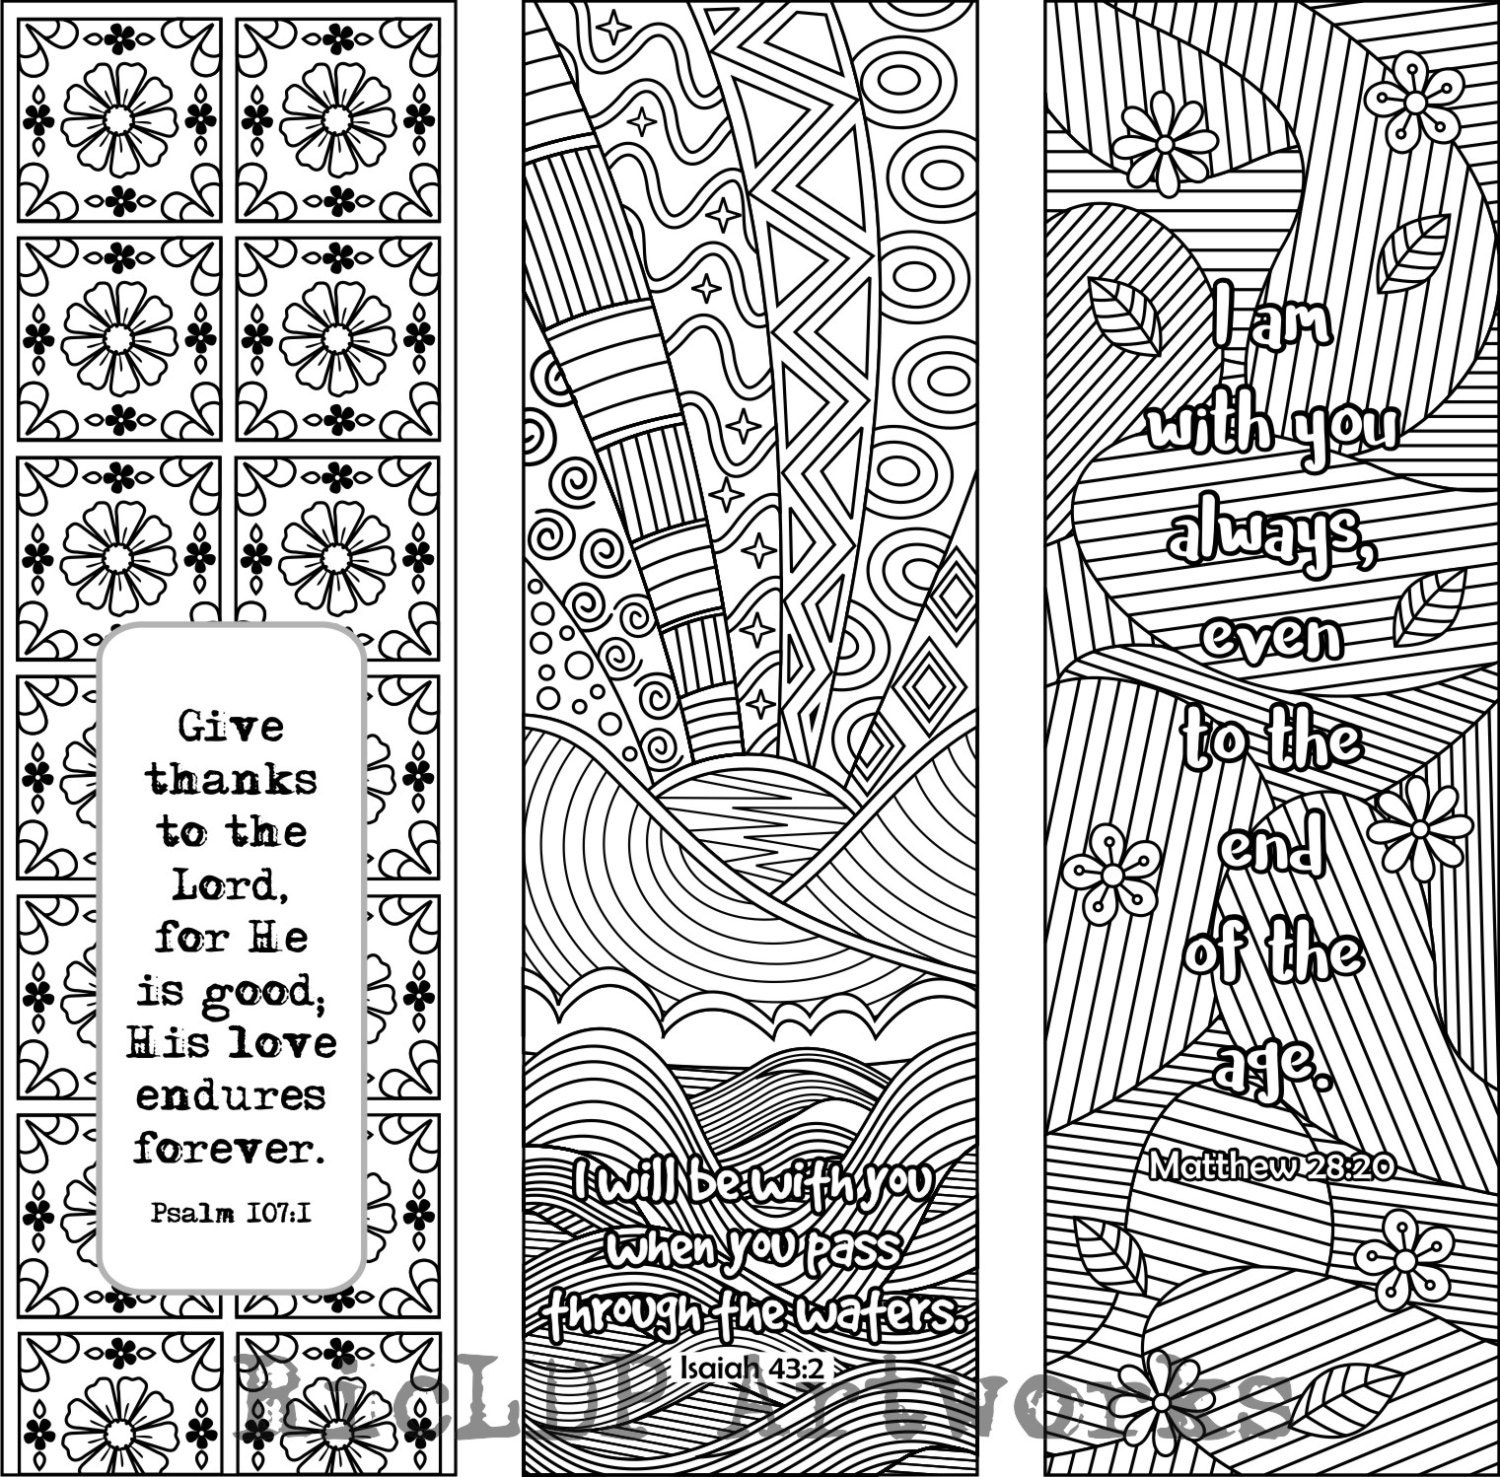 Download 6 Bible Verse Coloring Bookmarks plus 3 designs with blank